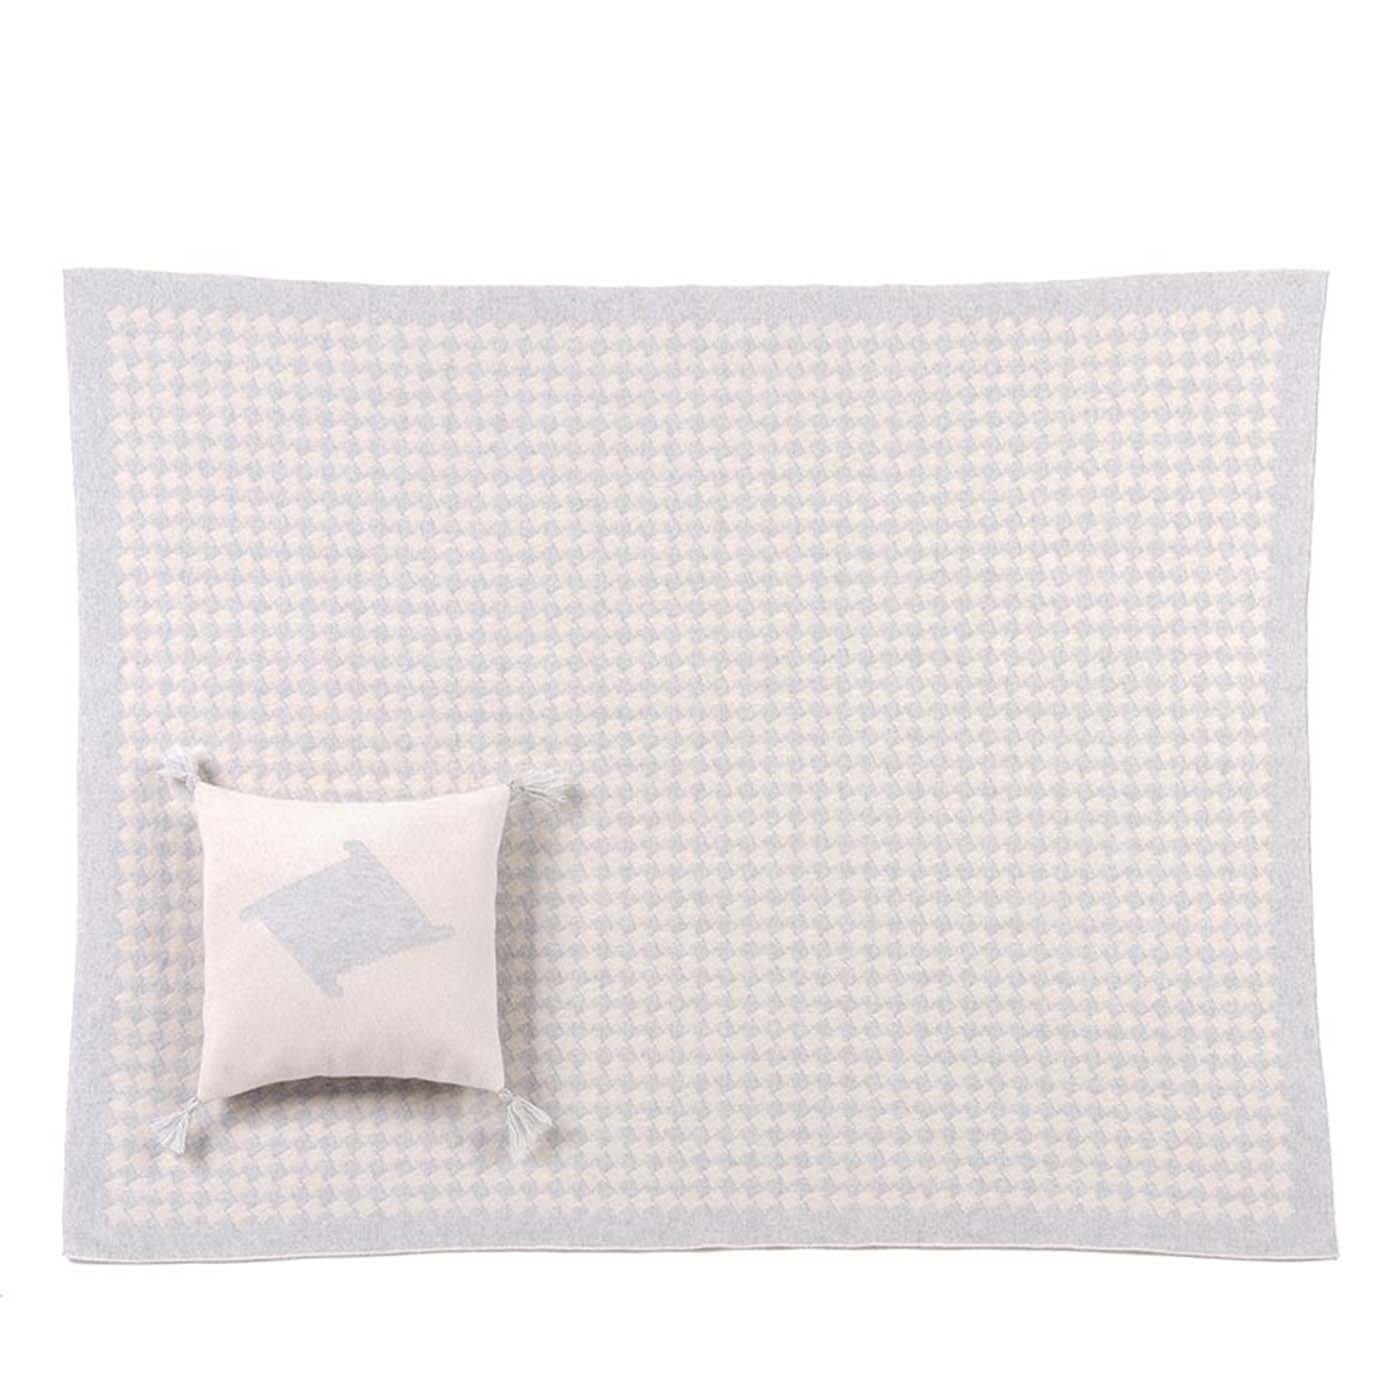 Baby Blanket with Small Pied de Poule Pattern - Roberta Licini